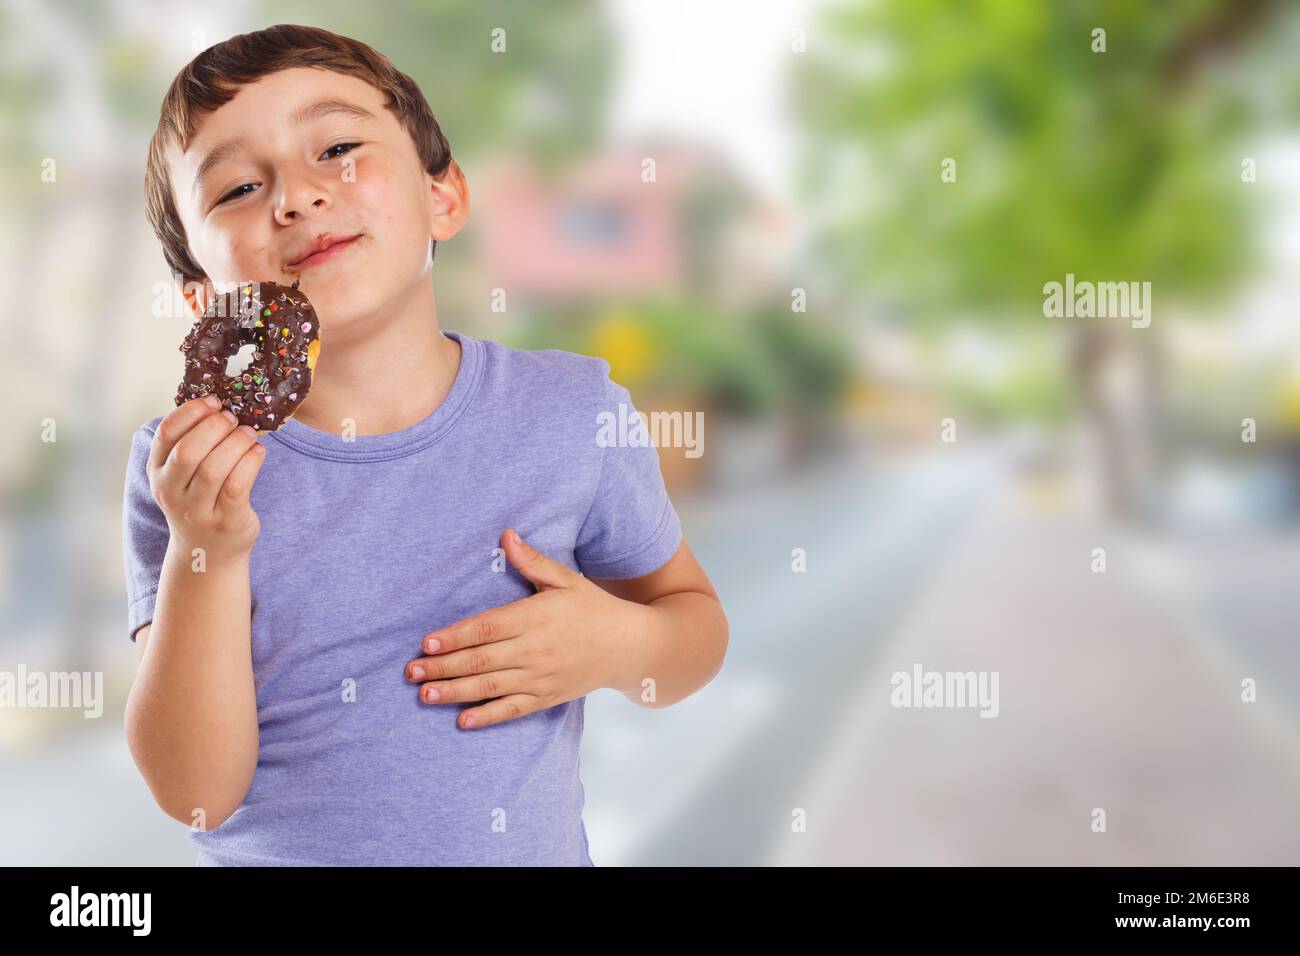 Young boy child eating donut town copyspace copy space unhealthy sweet sweets Stock Photo